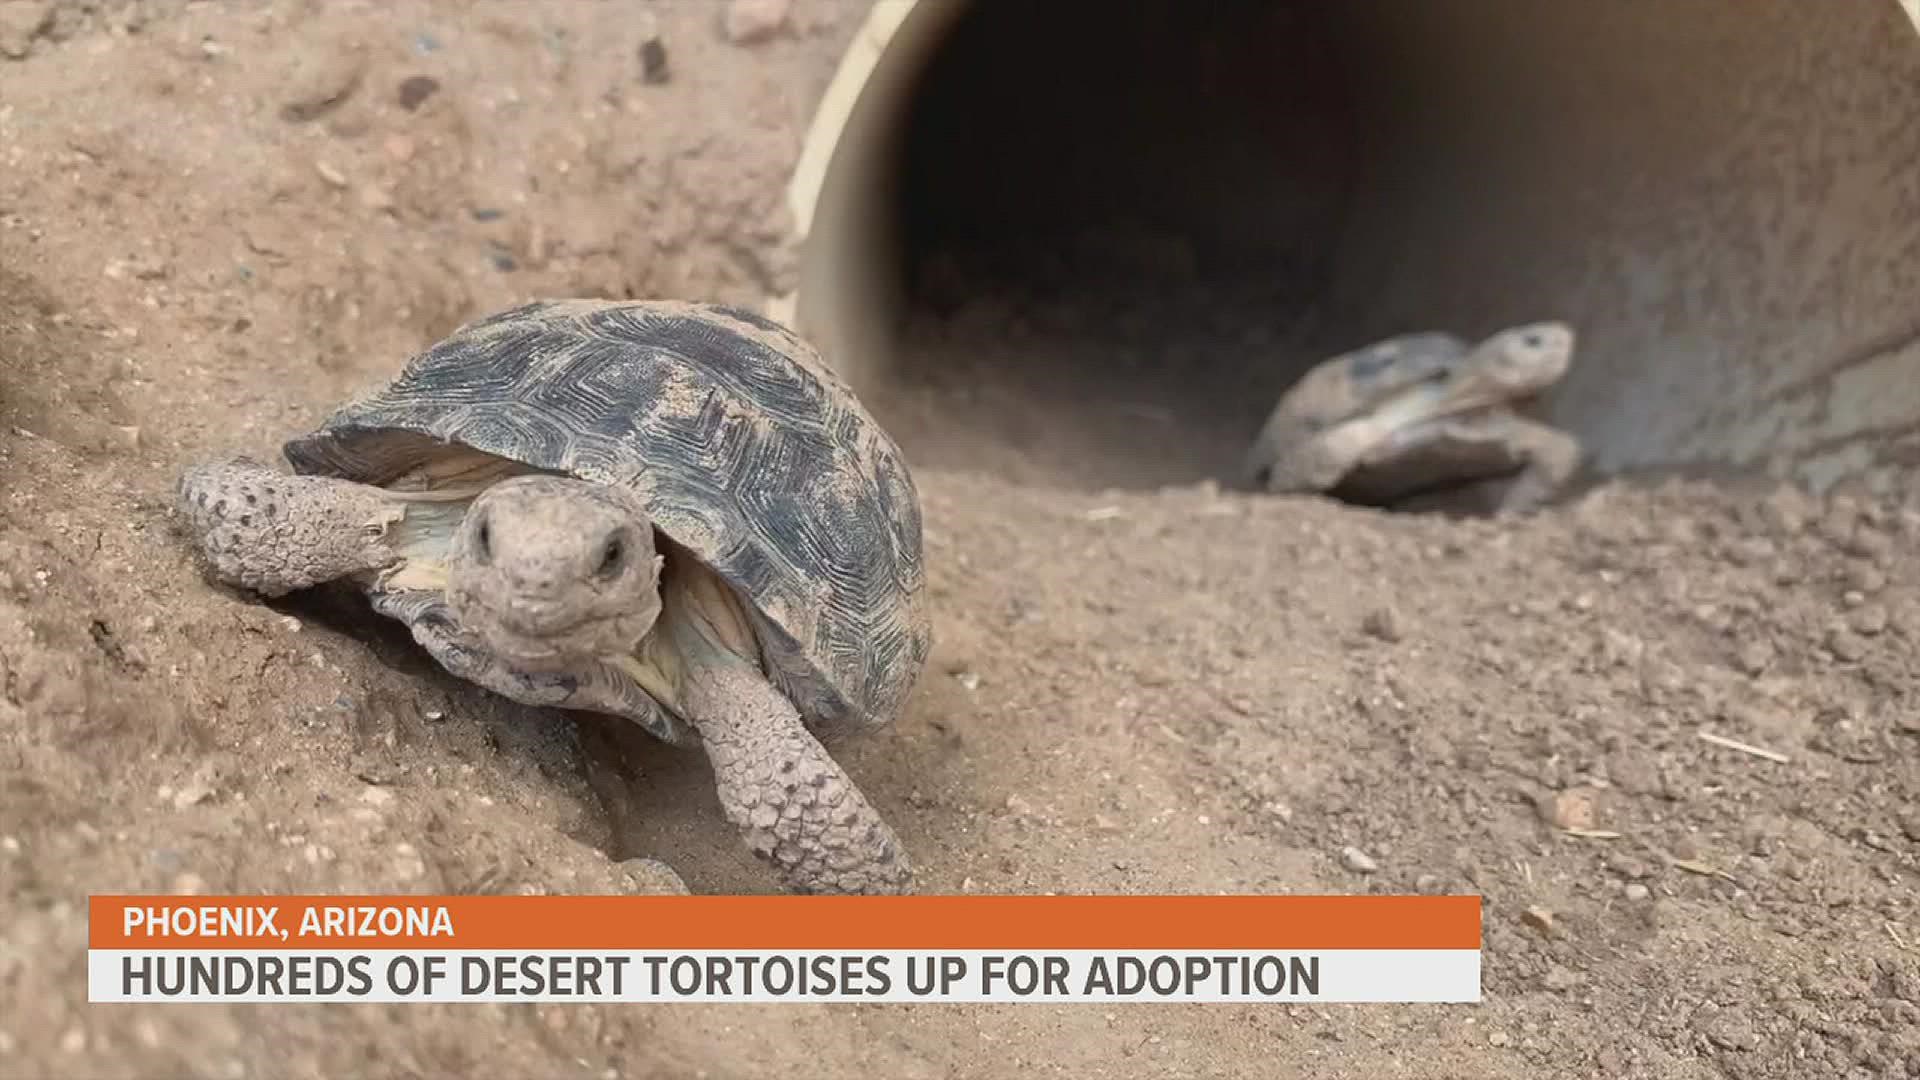 All of the tortoises have been seized from either illegal breeding operations or given up by owners who could no longer care for them.